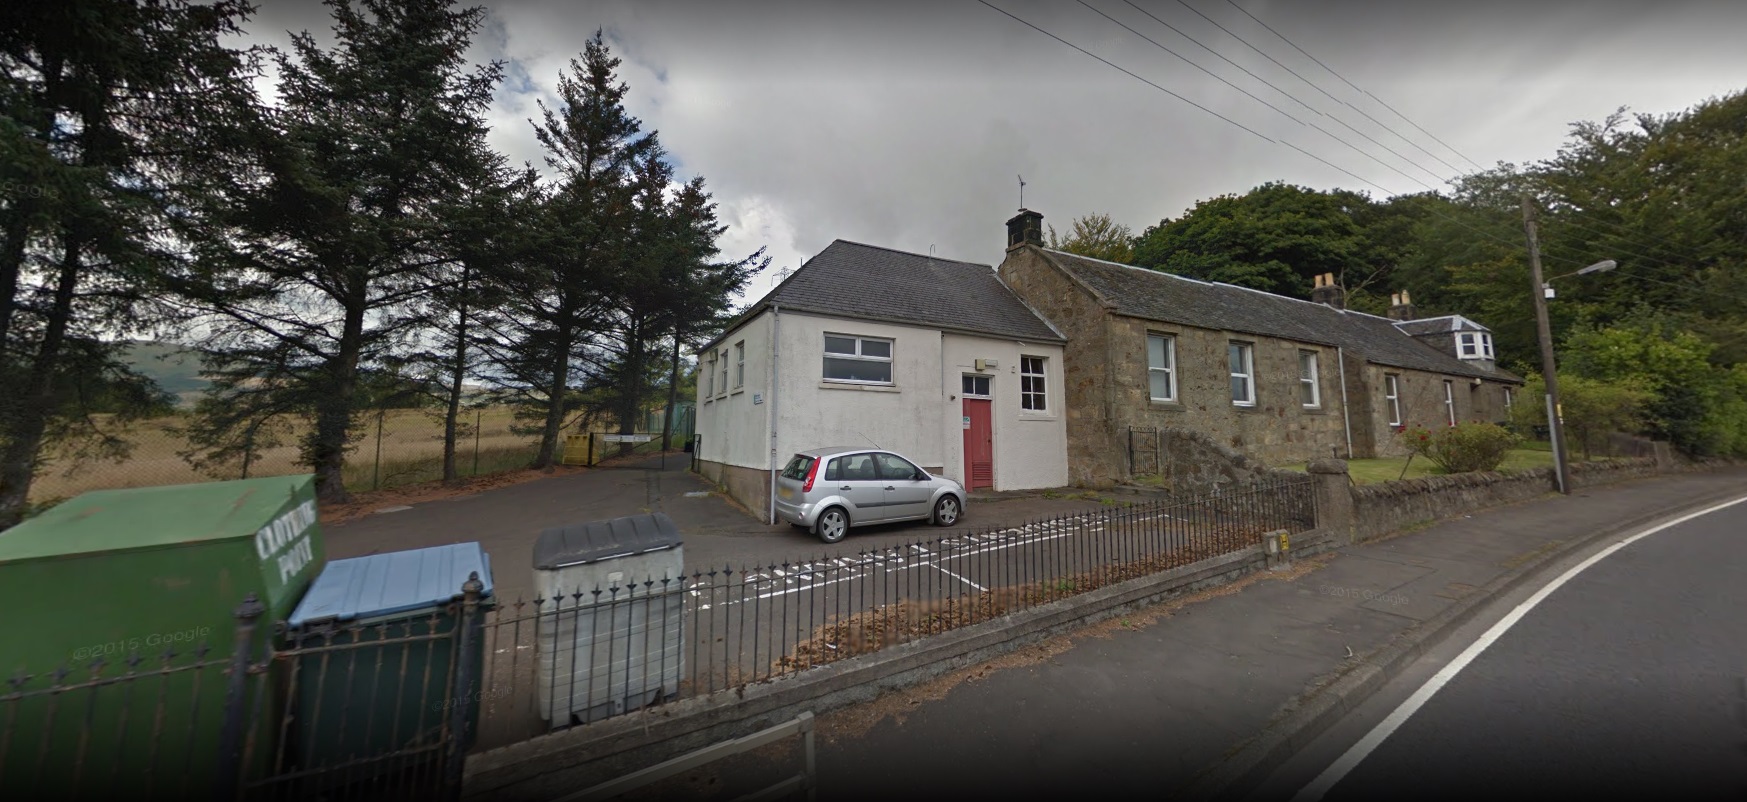 Last ditch appeal to save Perthshire village school